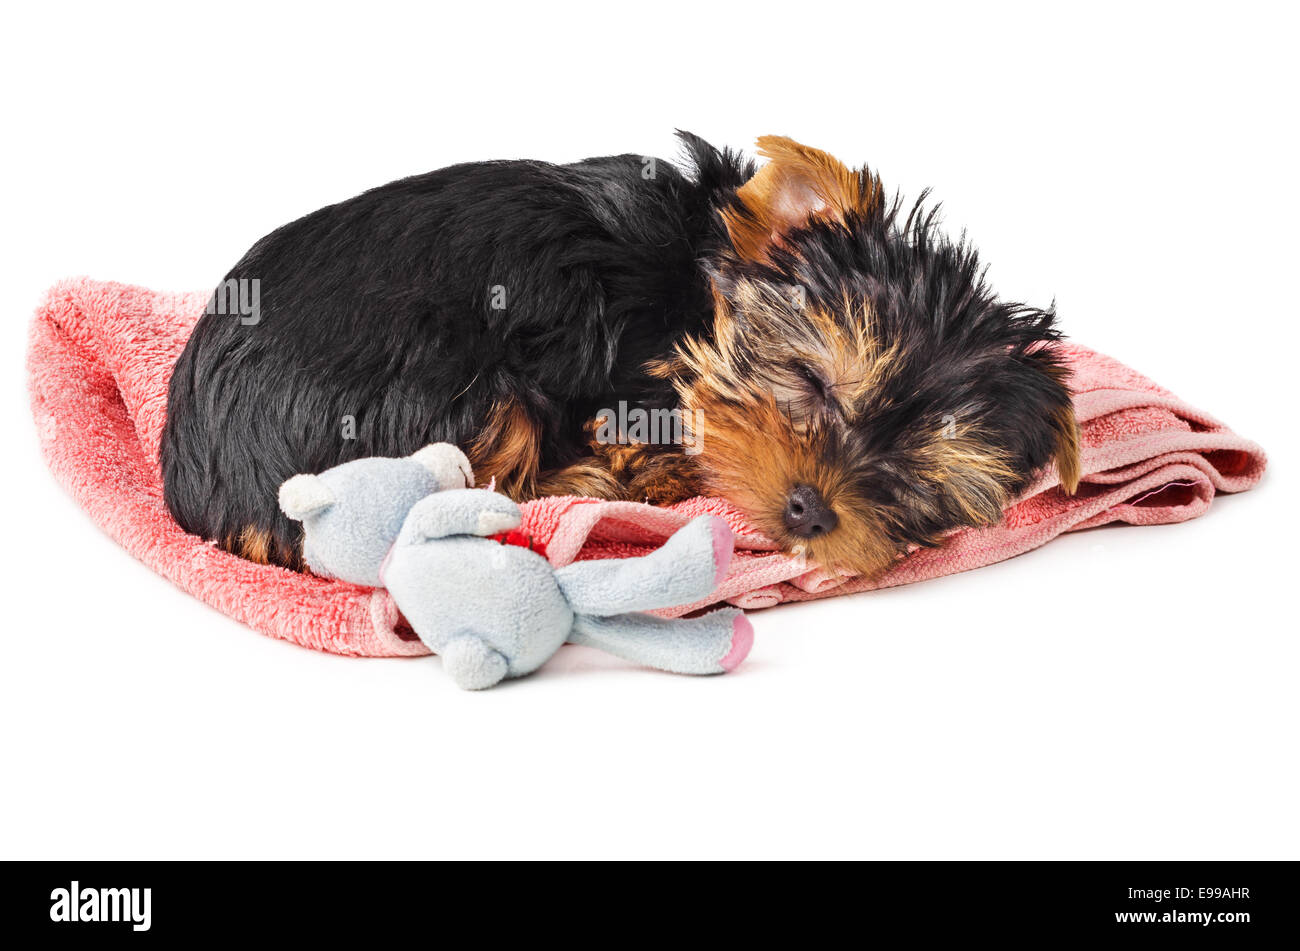 2 months old Yorkshire Terrier puppy sleeping on pink towel with toy isolated on white background Stock Photo